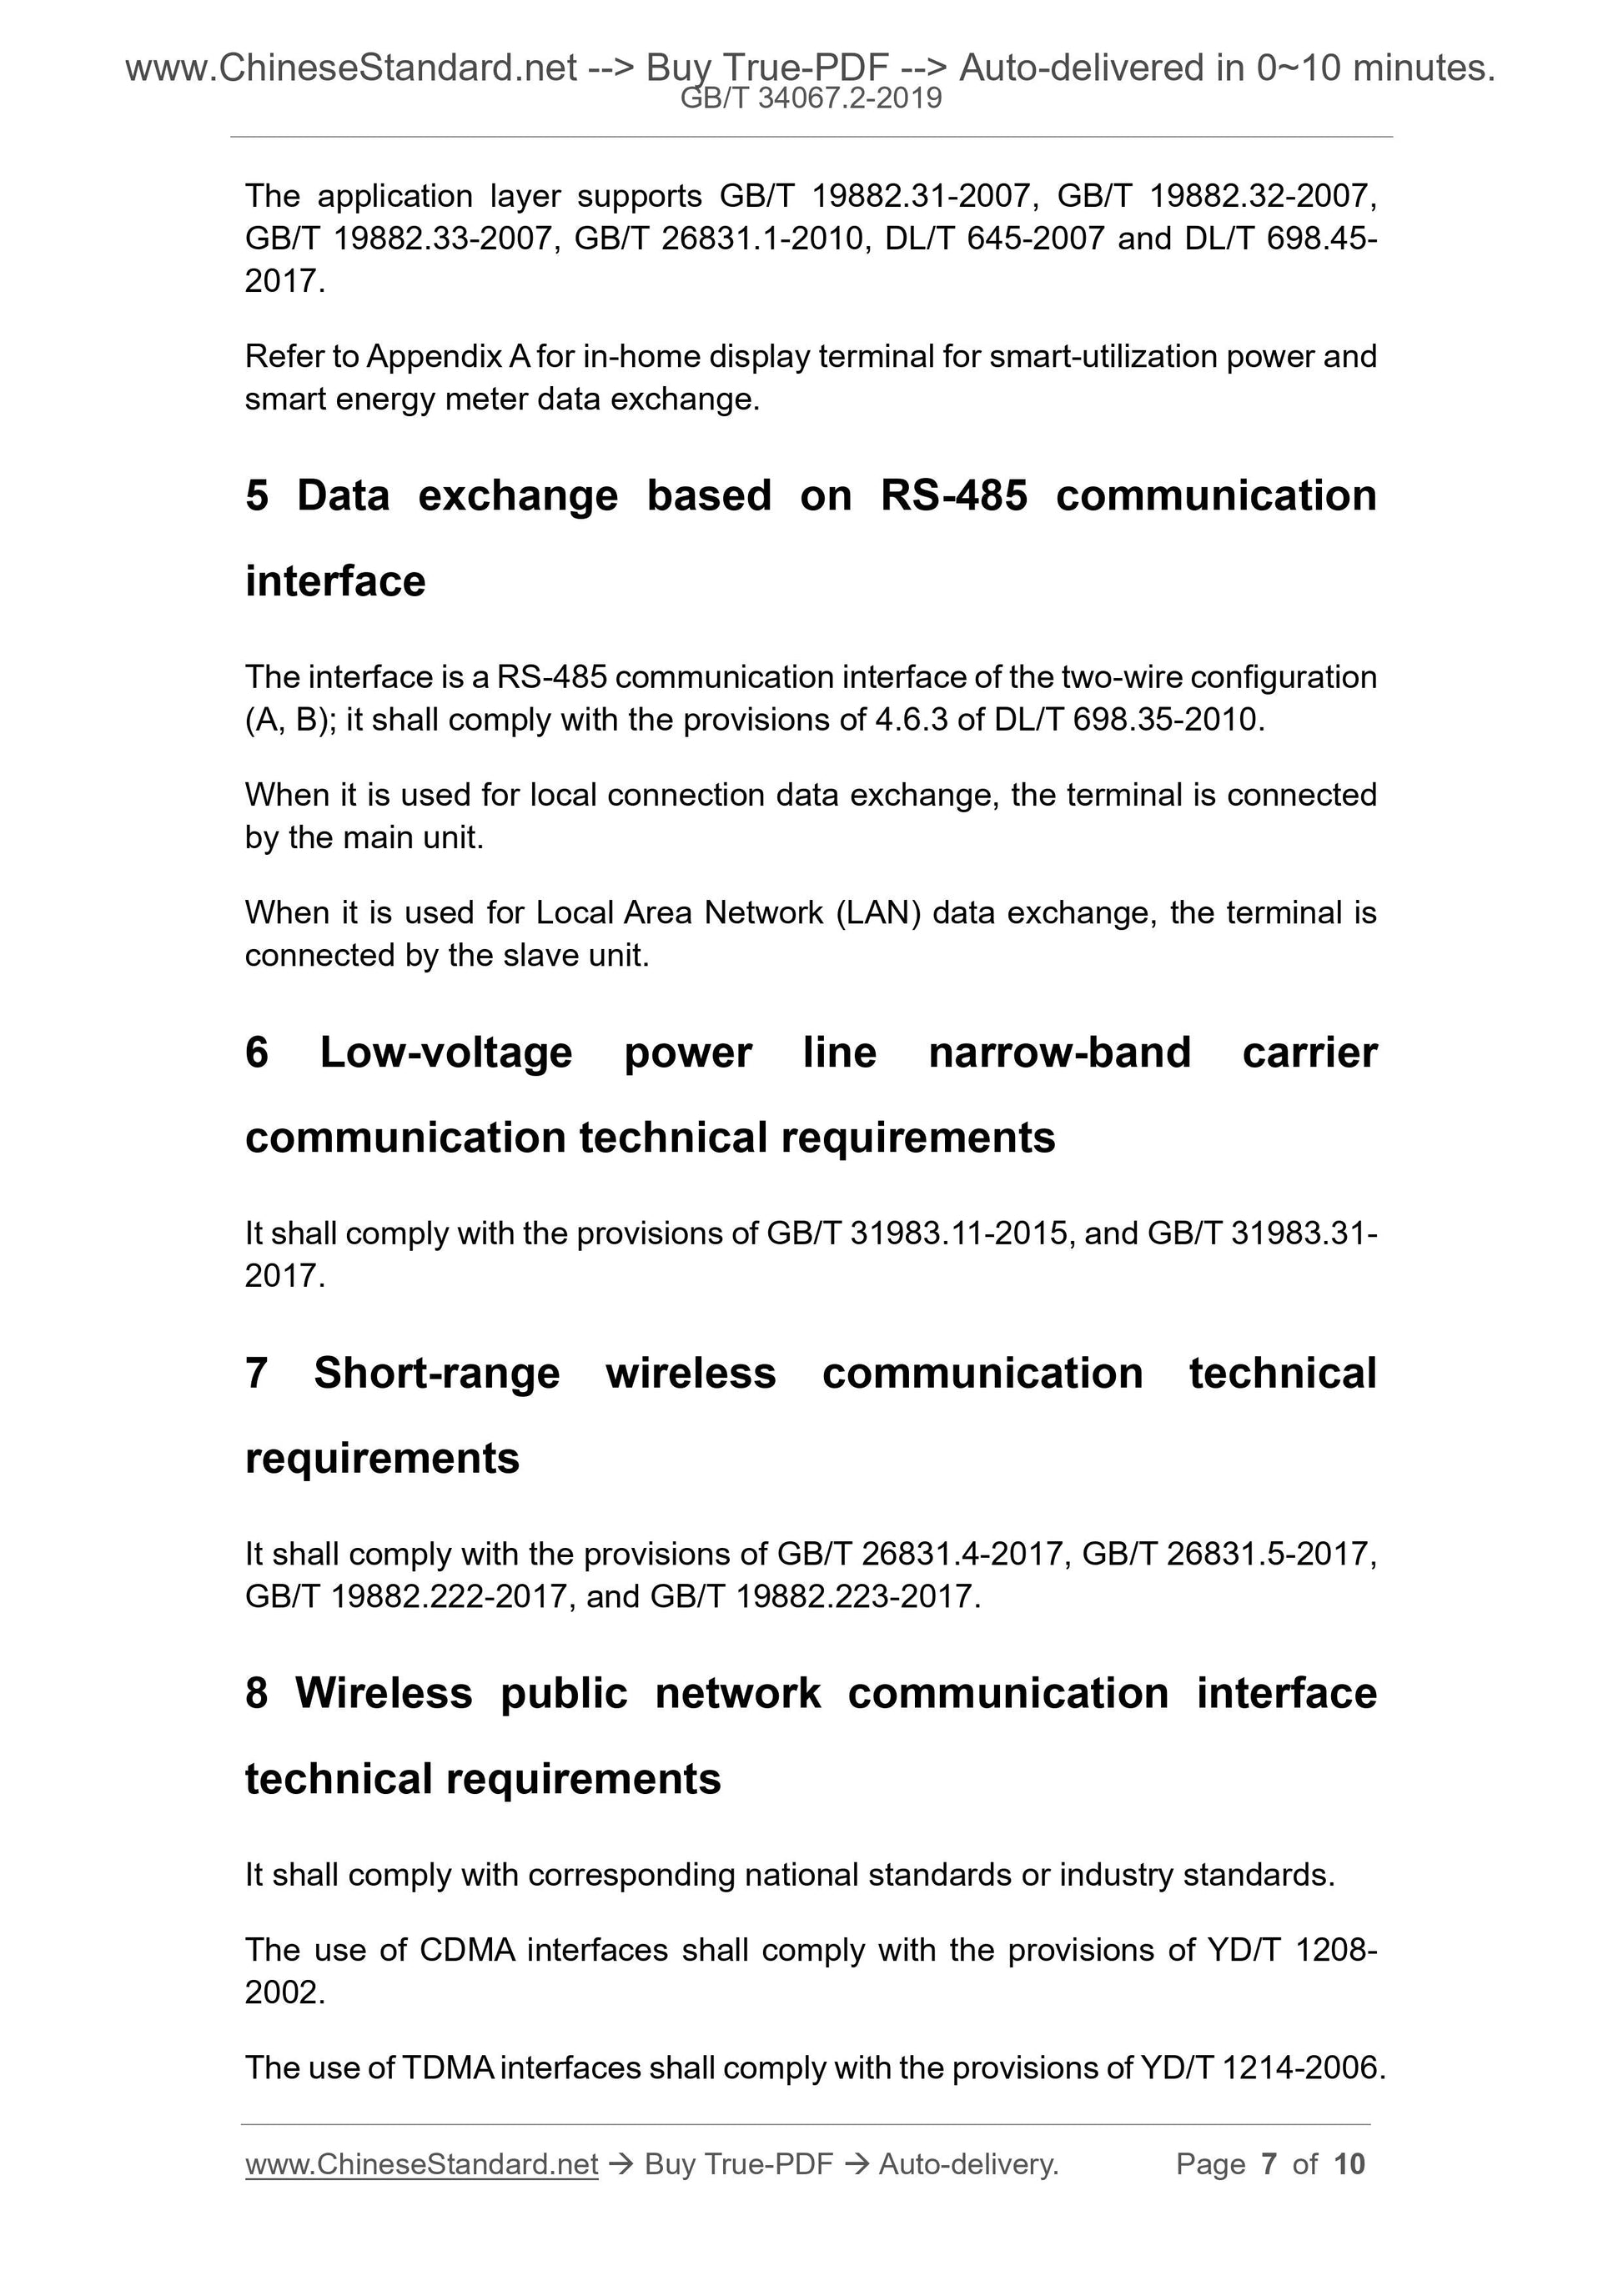 GB/T 34067.2-2019 Page 5